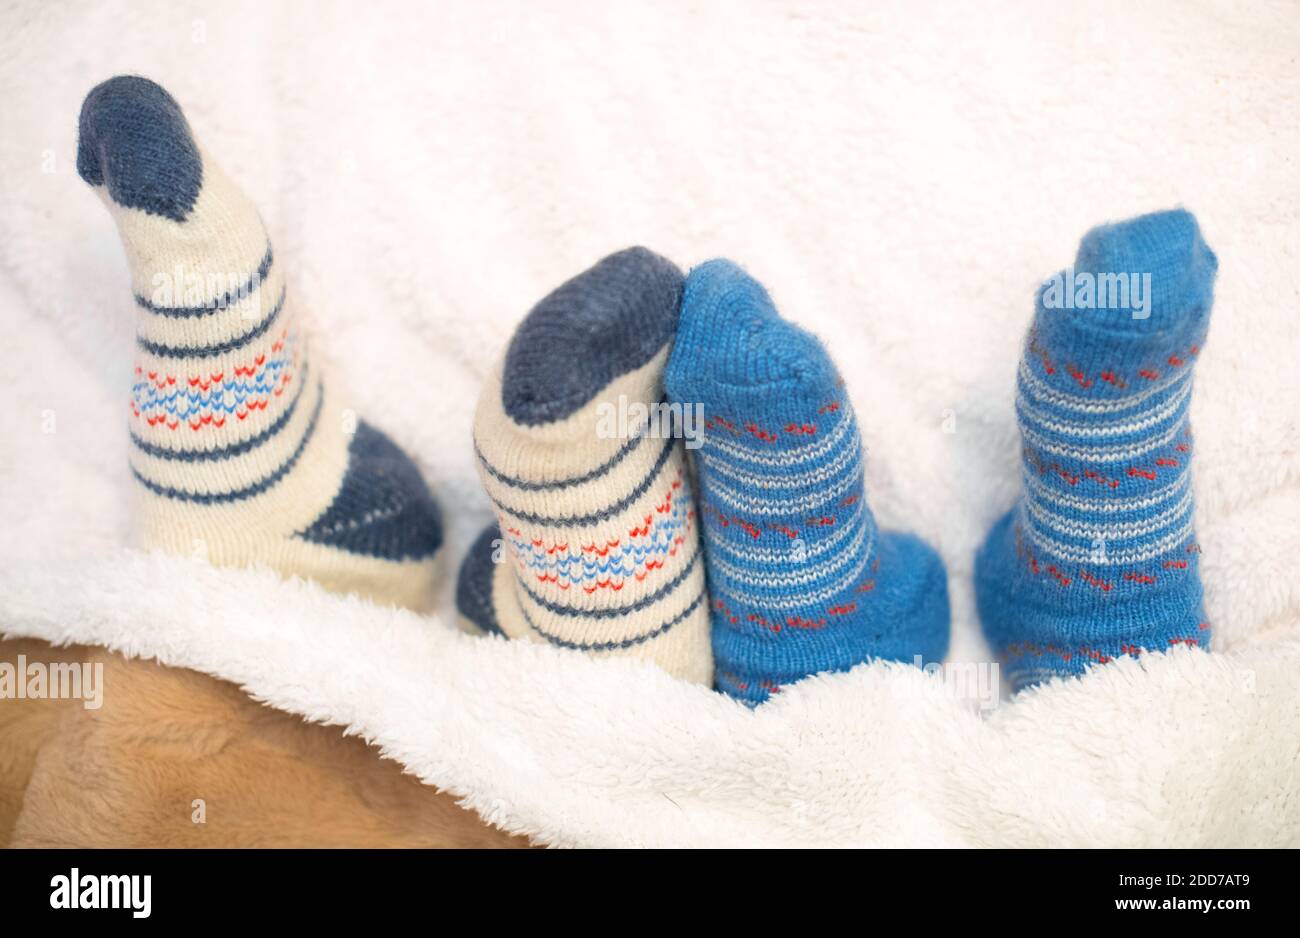 The feet of people in warm wool socks with a Scandinavian pattern peek out from under the blanket. Comfort and coziness on a cold winter day at home.  Stock Photo